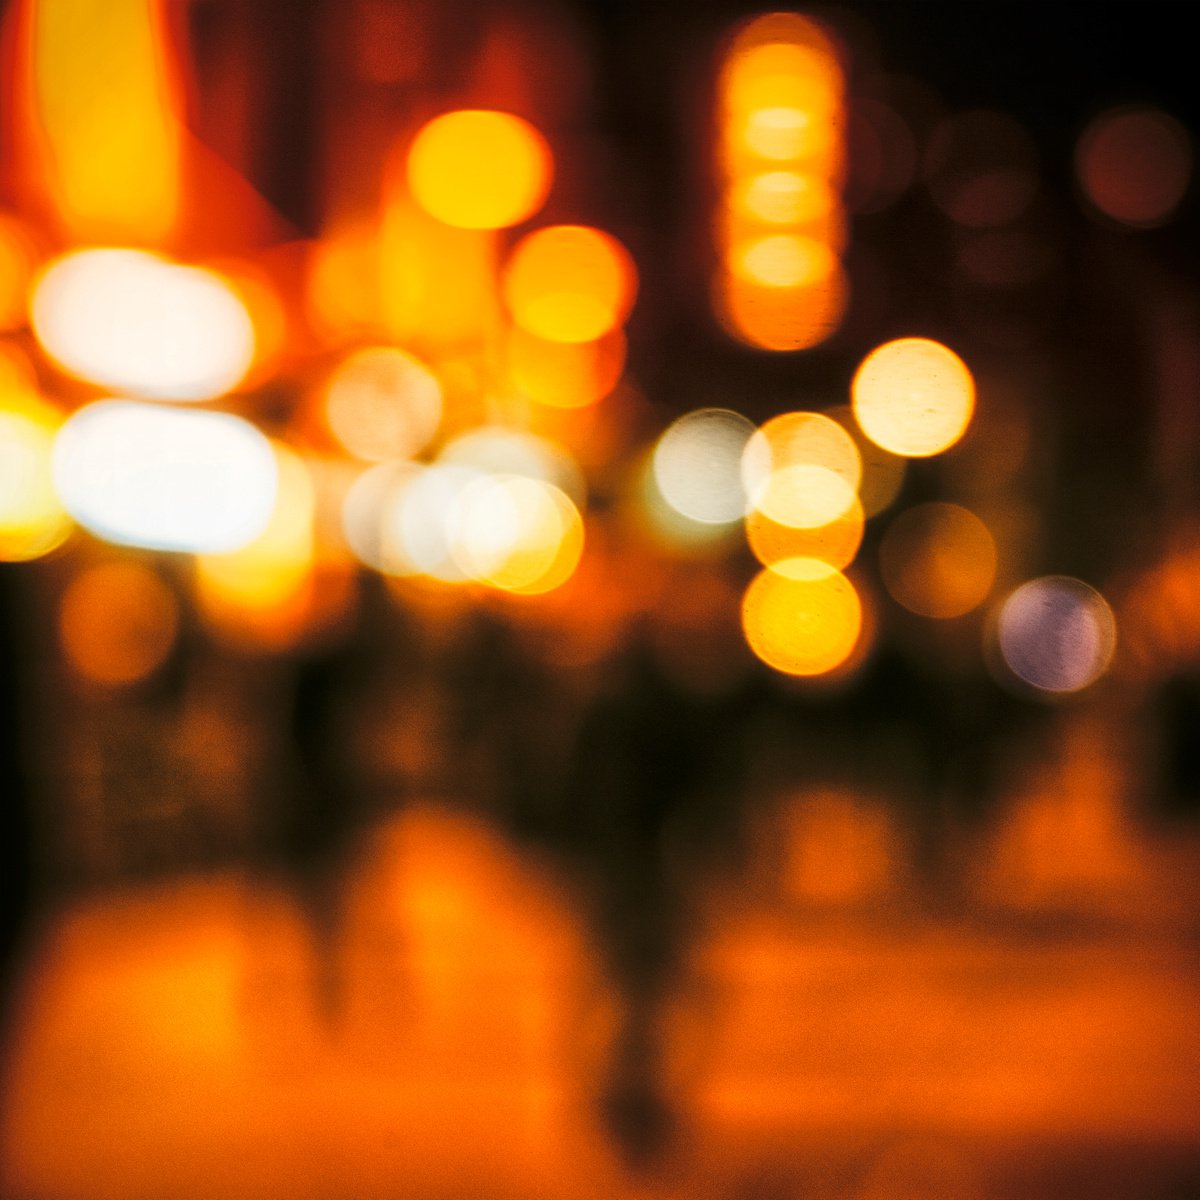 City Lights 18. Limited Edition Abstract Photograph Print  #1/15. Nighttime abstract photo... by Graham Briggs